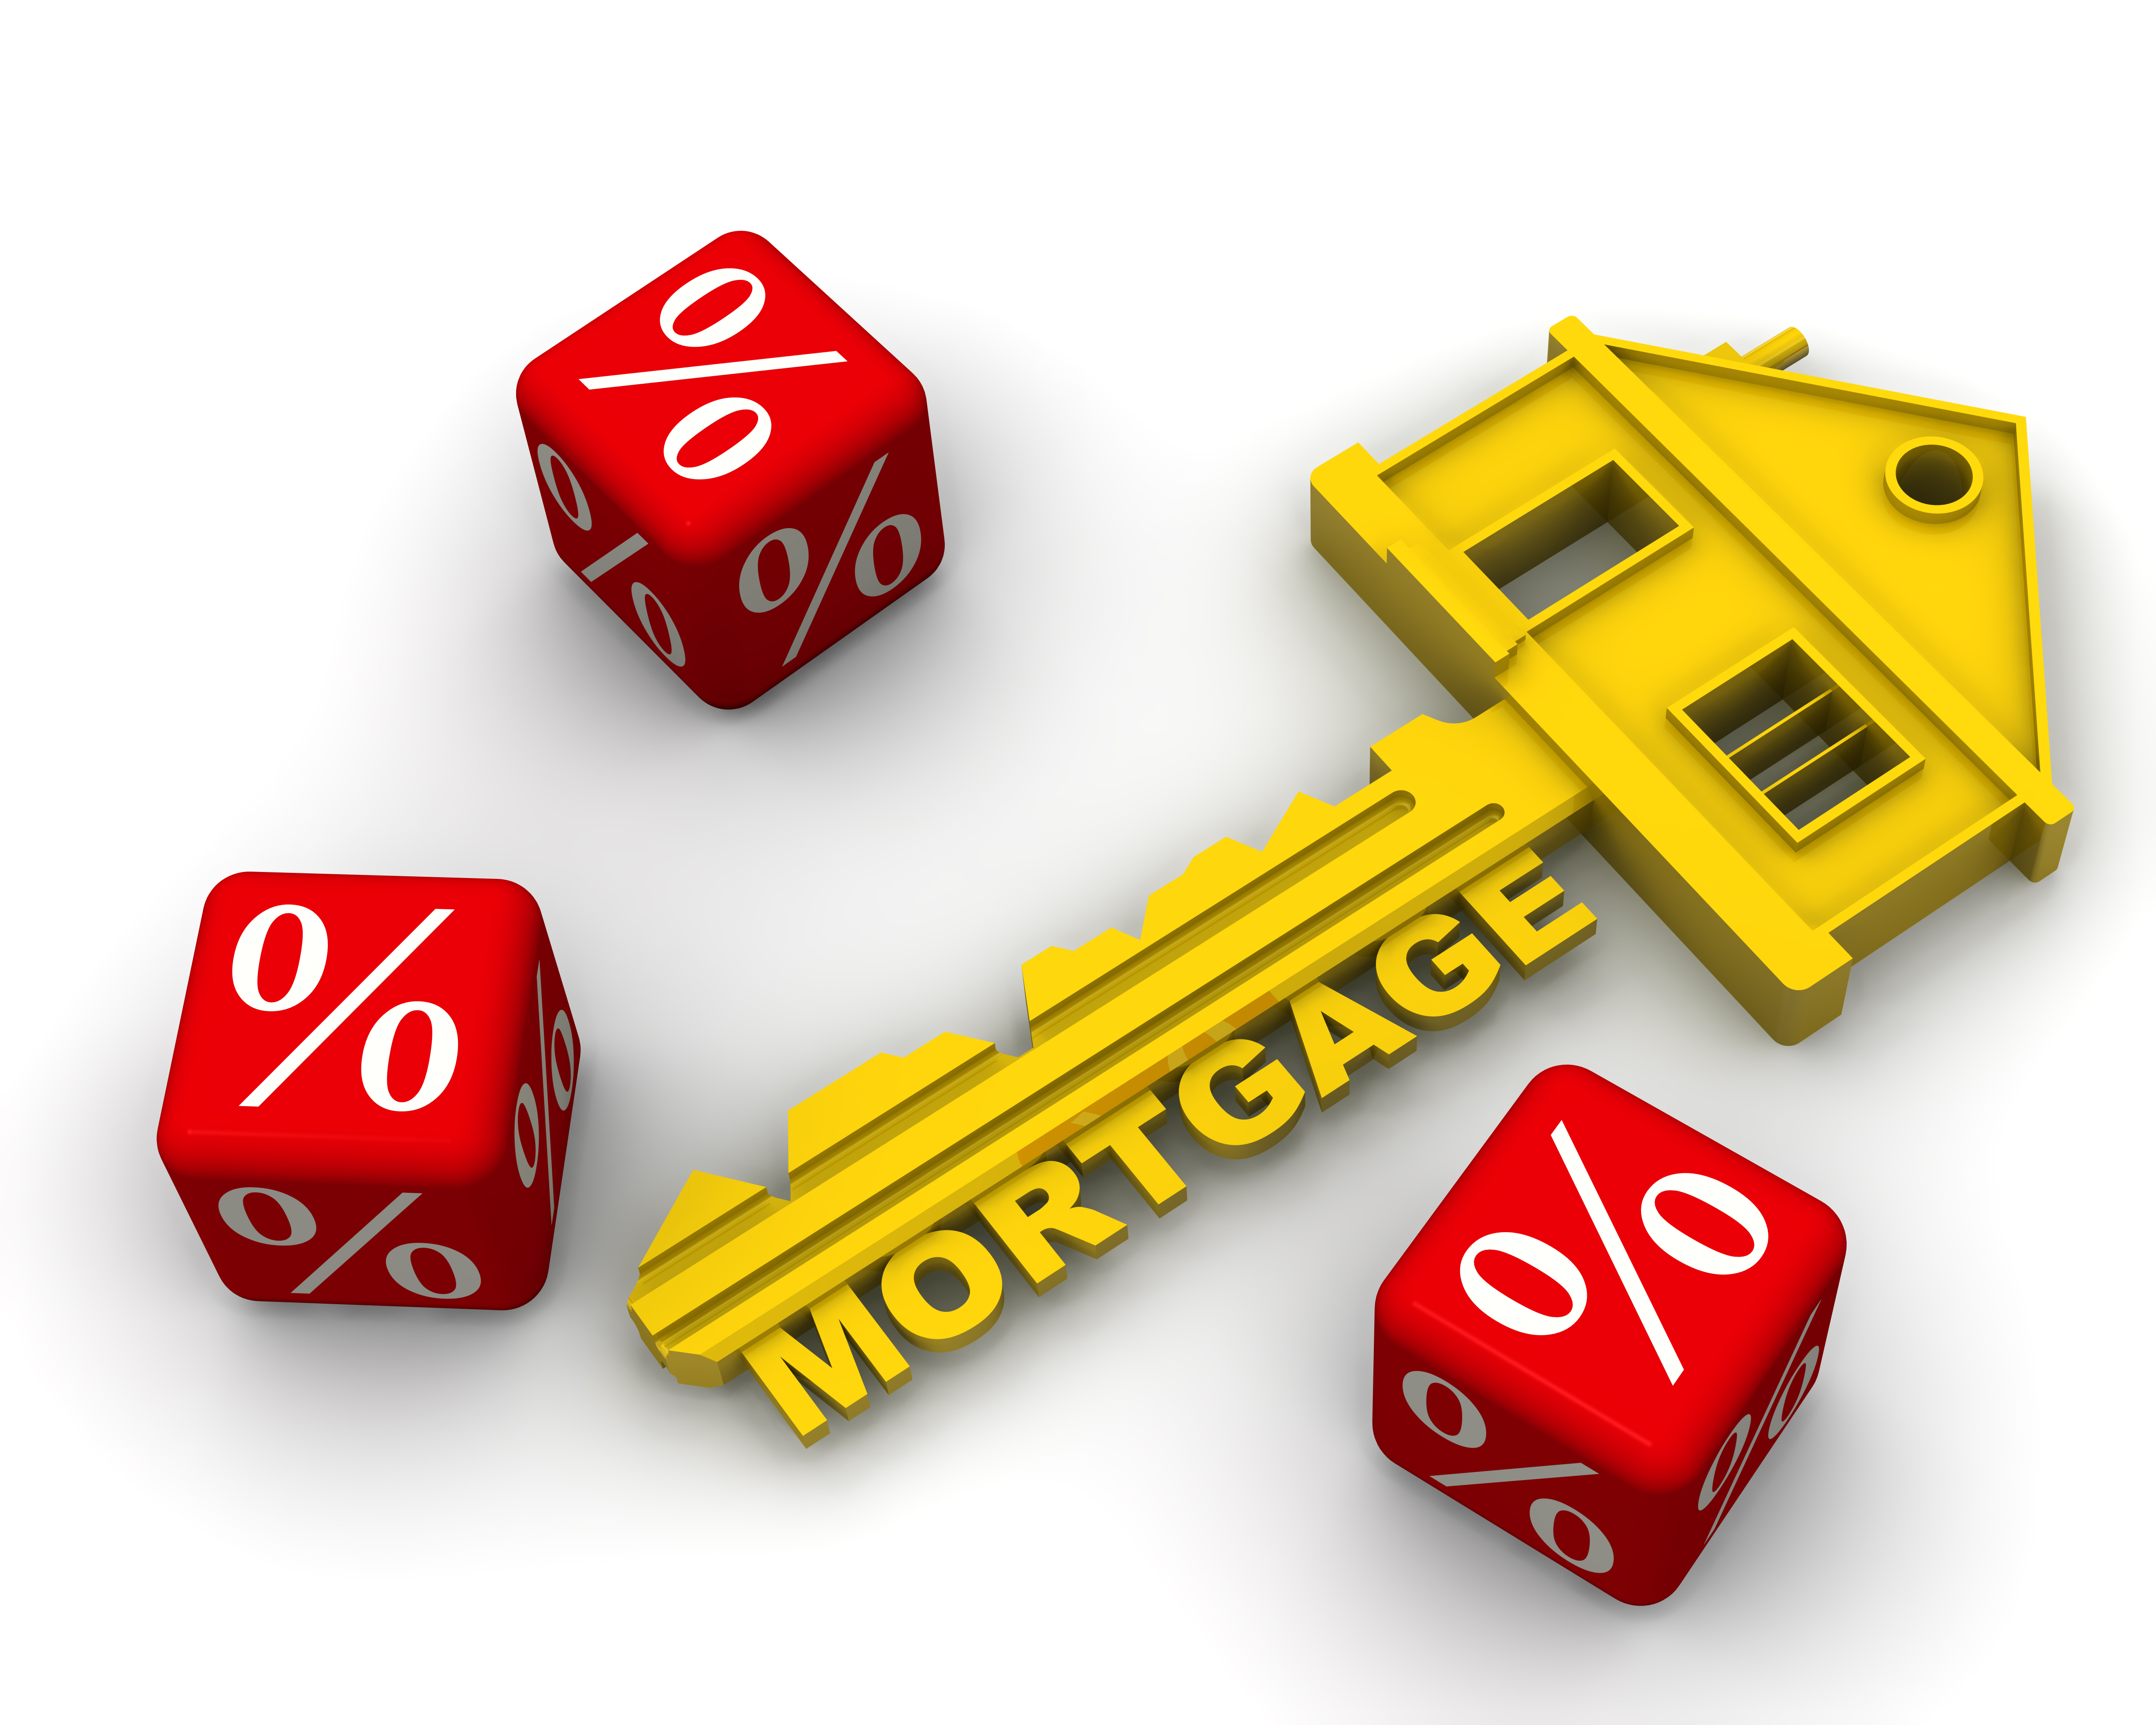 Santa Anna Mortgage Lender E Mortgage Captial Offers The Best Interest Rates Call 855-569-3700